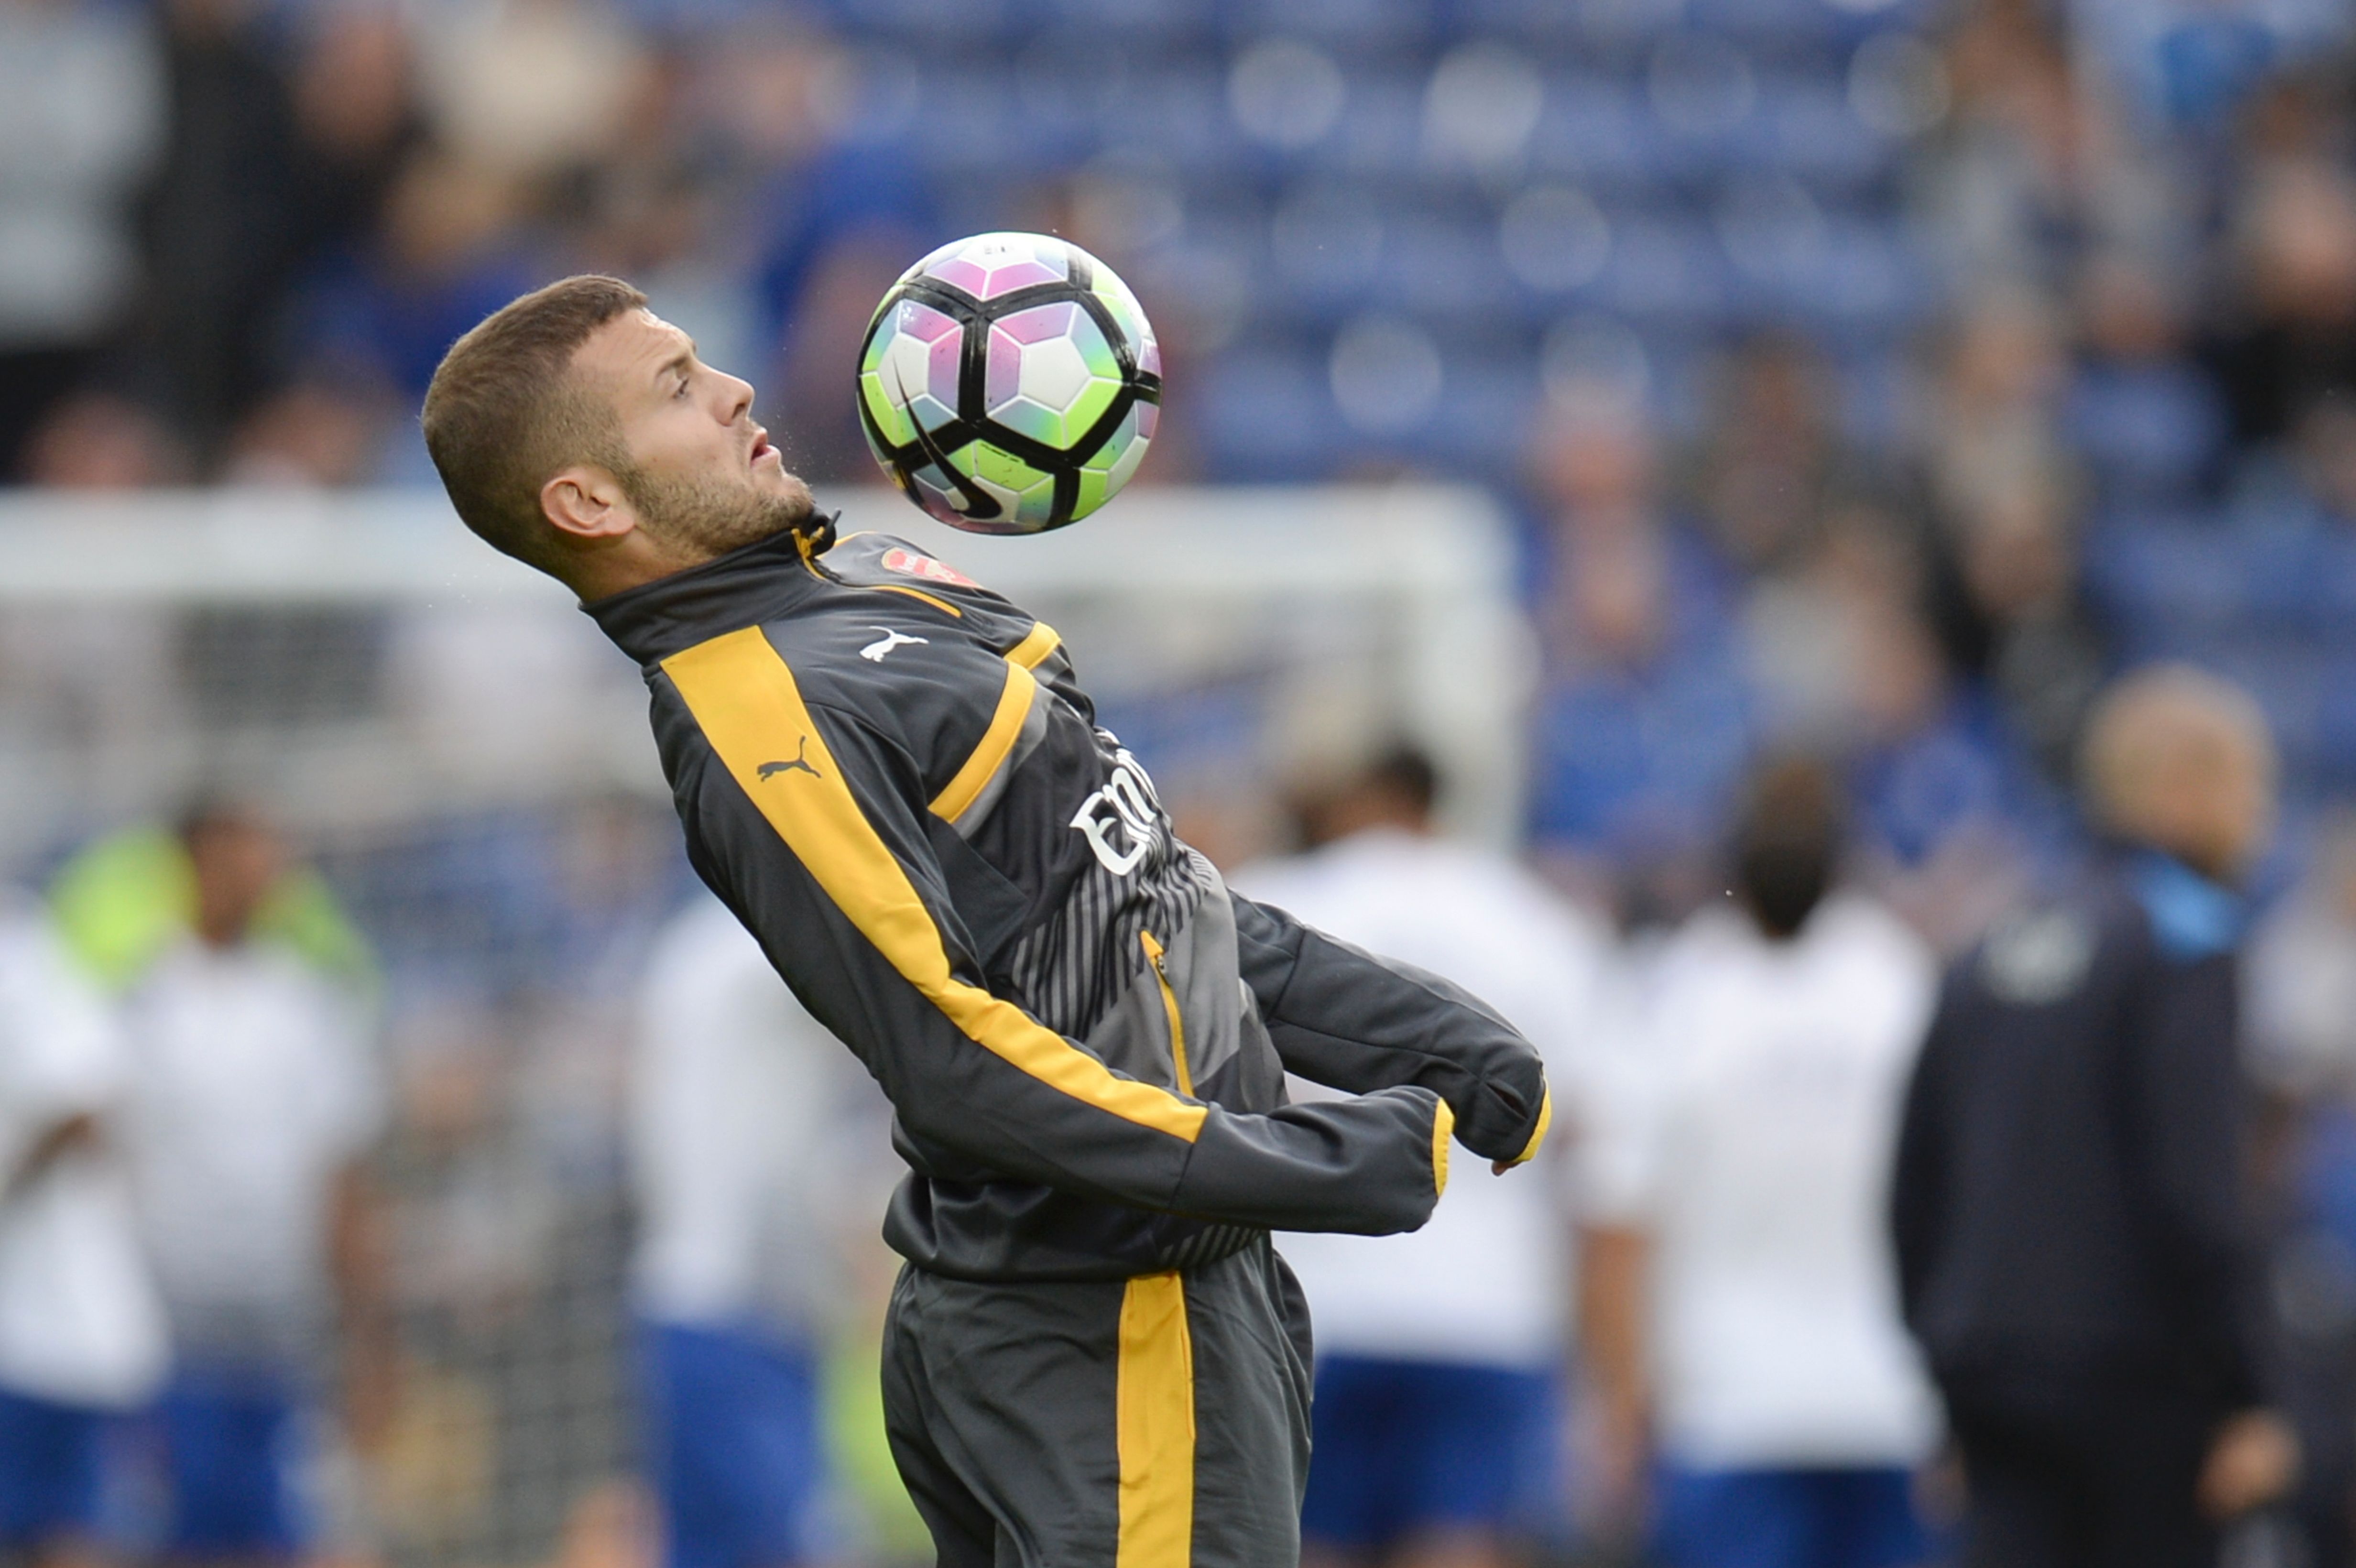 Arsenal's English midfielder Jack Wilshere warms up before the English Premier League football match between Leicester City and Arsenal at King Power Stadium in Leicester, central England on August 20, 2016. / AFP / OLI SCARFF / RESTRICTED TO EDITORIAL USE. No use with unauthorized audio, video, data, fixture lists, club/league logos or 'live' services. Online in-match use limited to 75 images, no video emulation. No use in betting, games or single club/league/player publications.  /         (Photo credit should read OLI SCARFF/AFP/Getty Images)